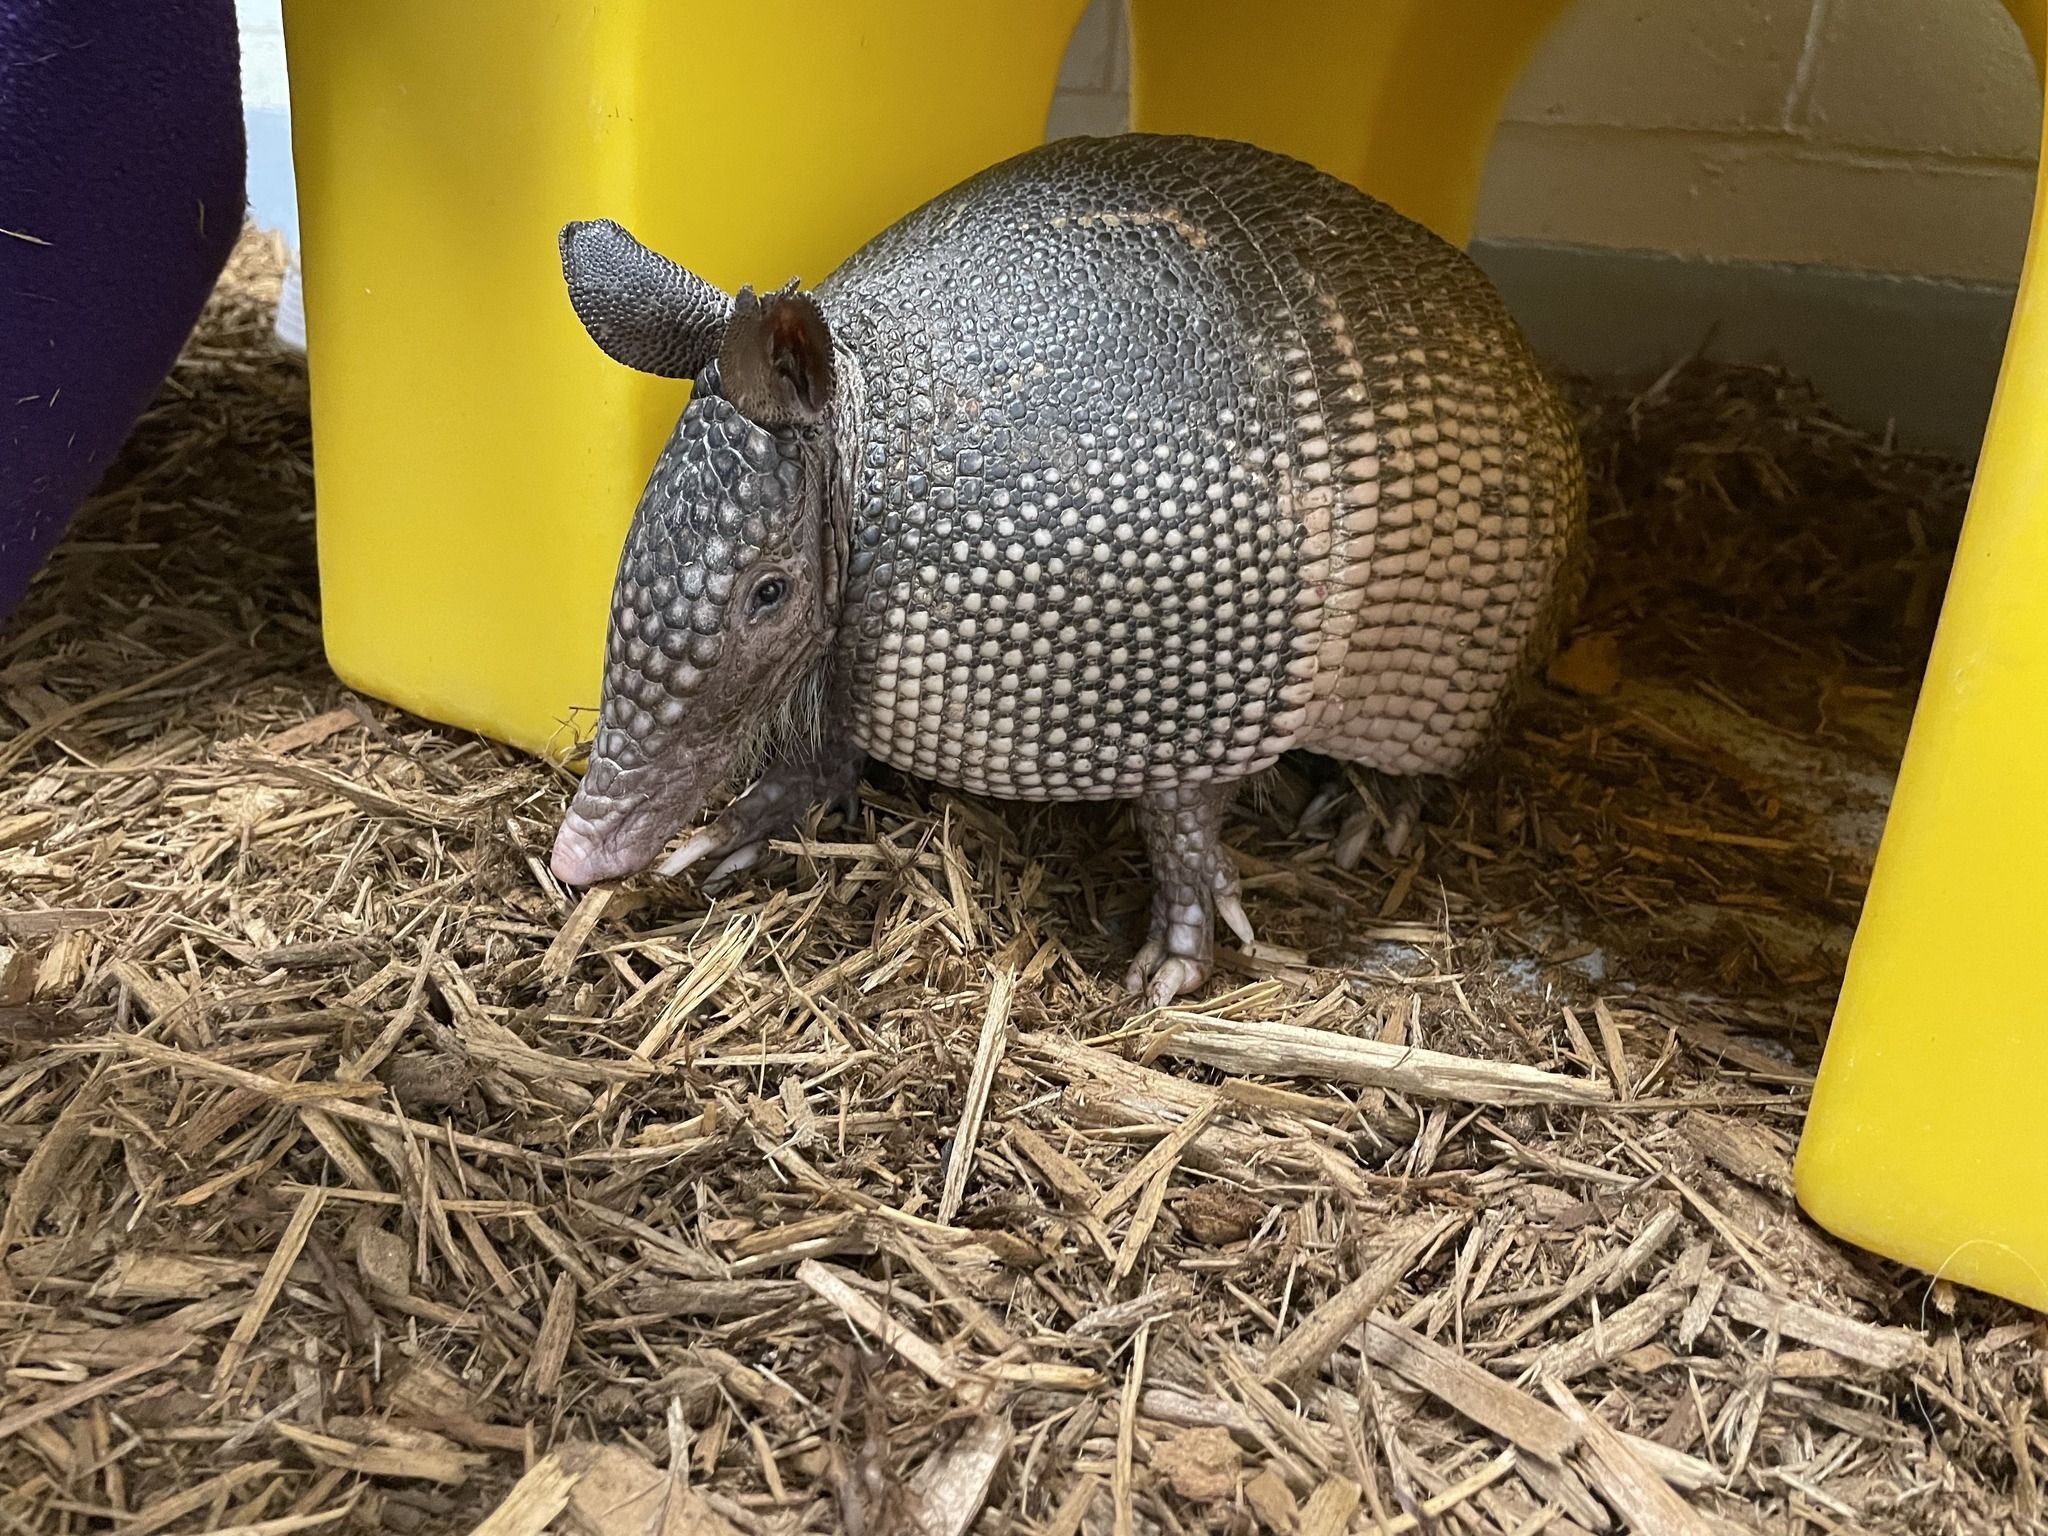 NWR Receives its first-ever armadillos